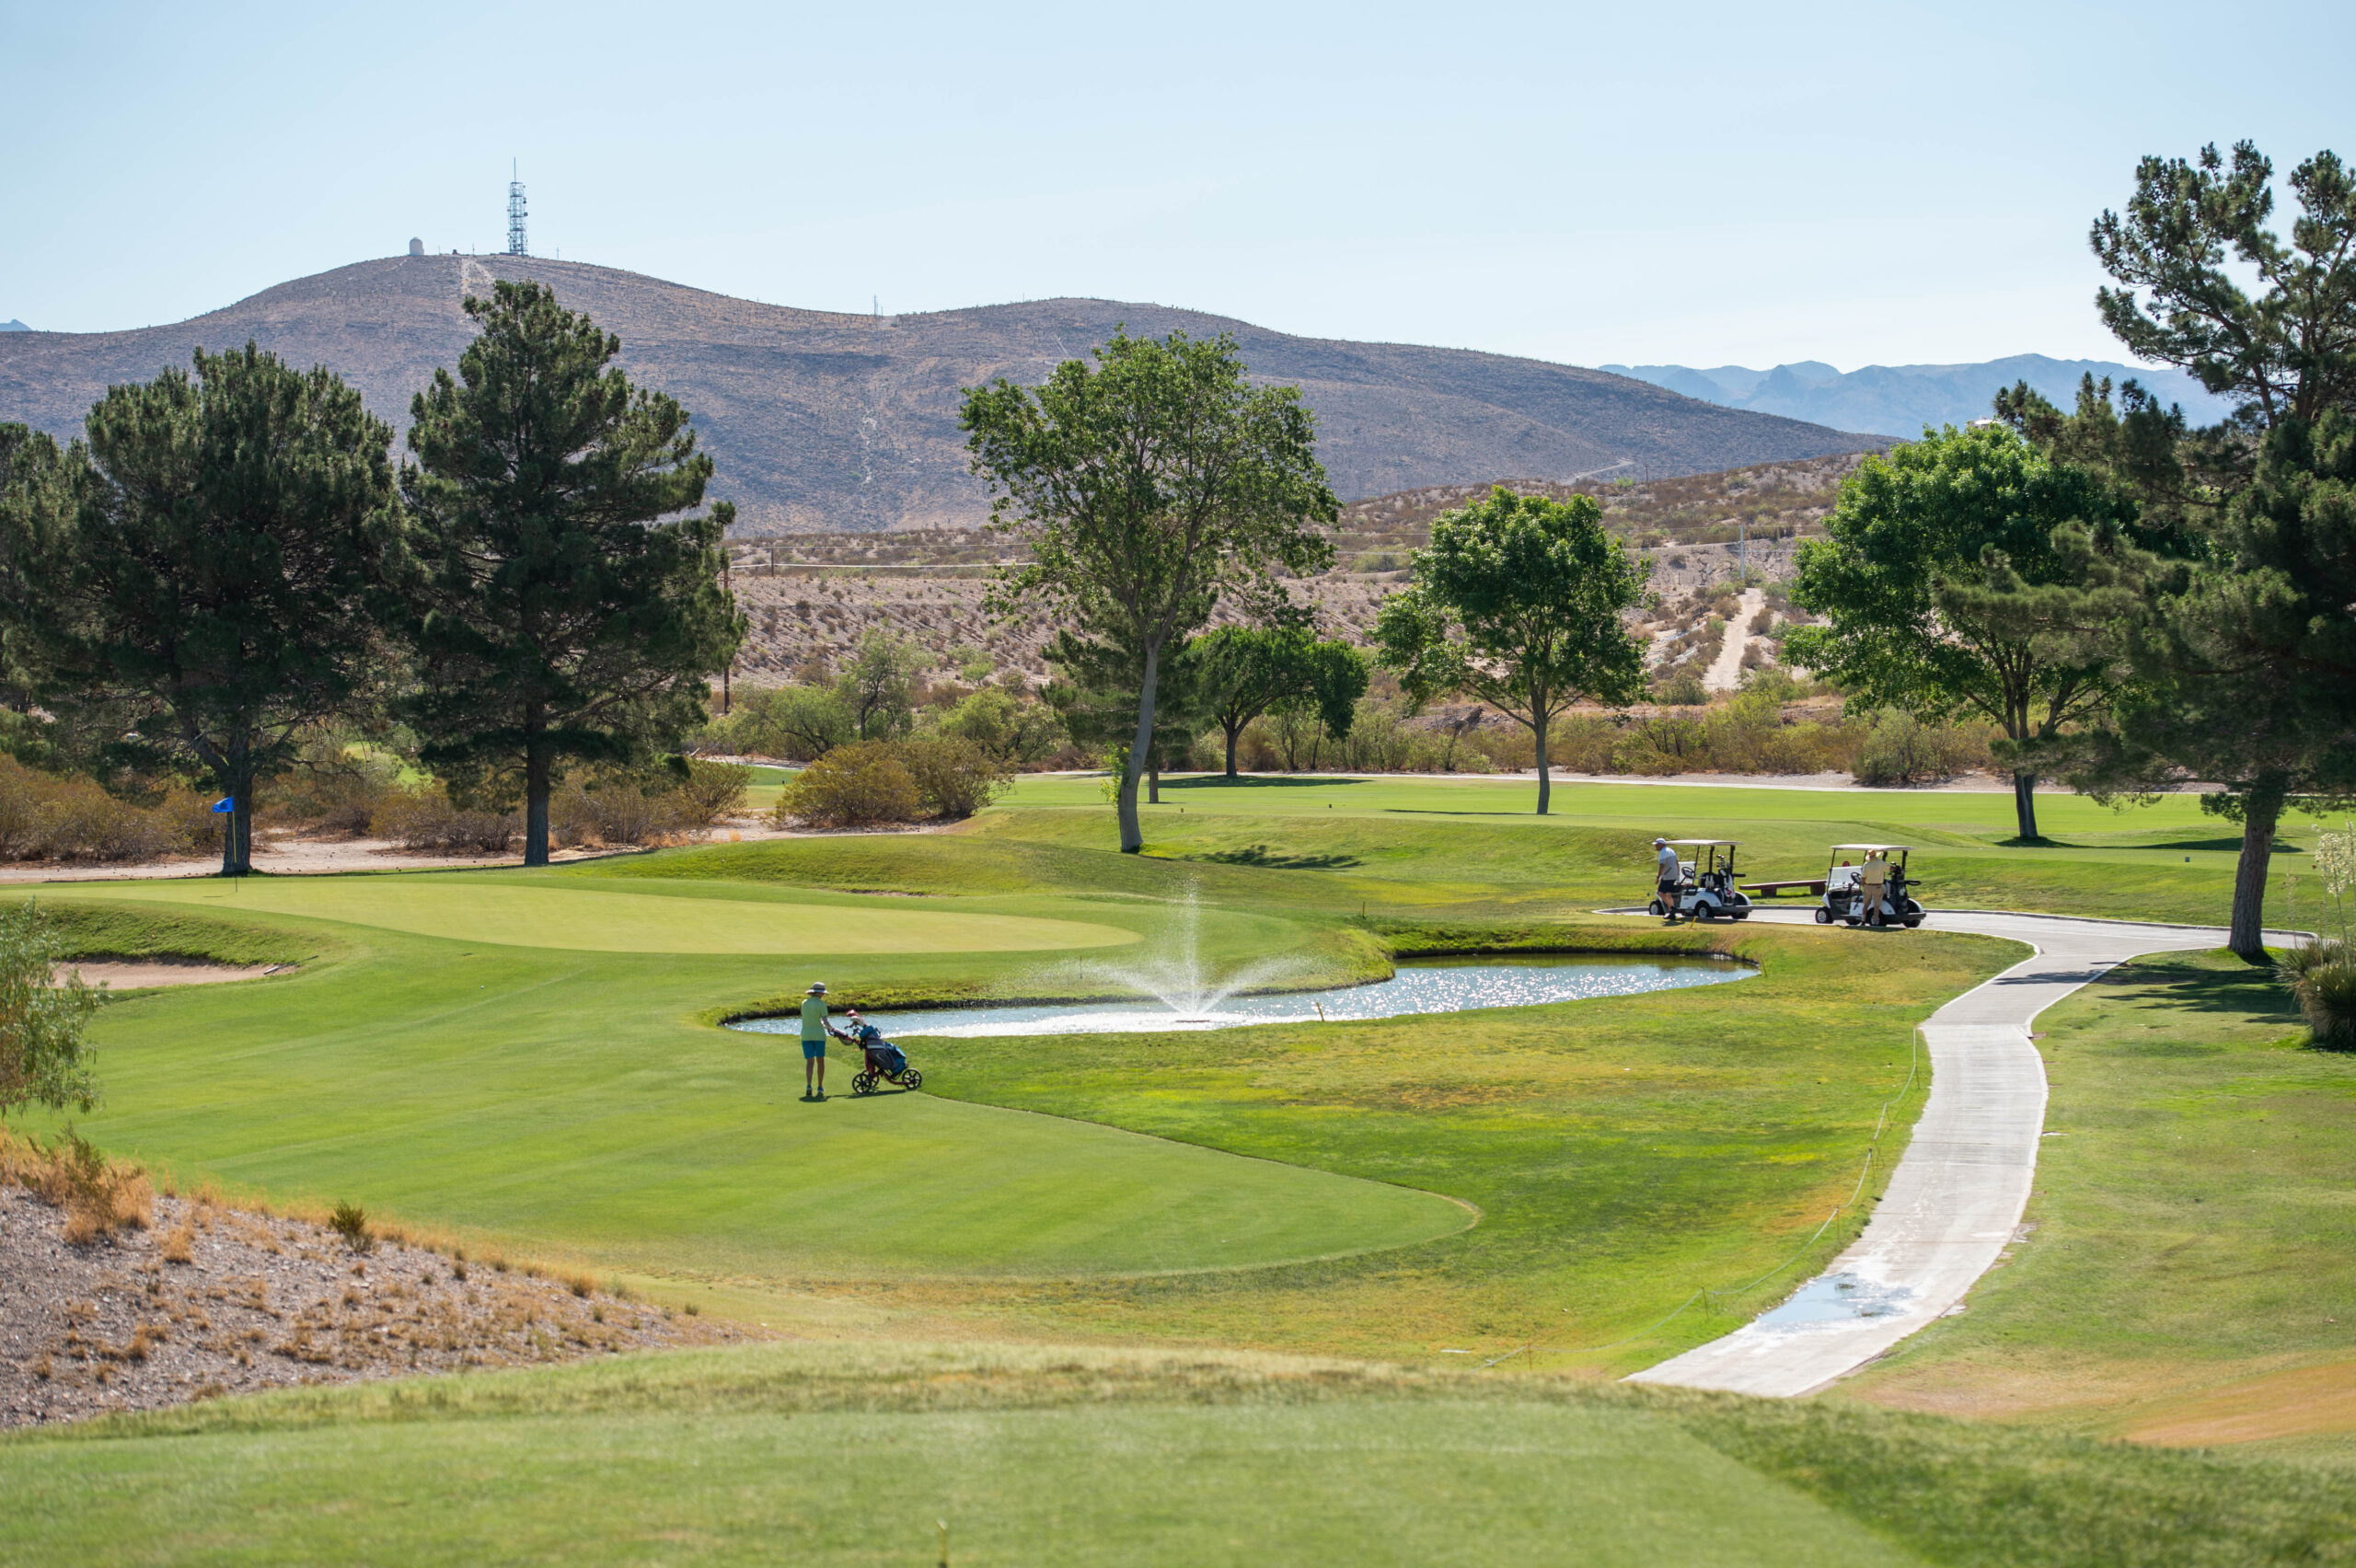 NMSU Golf Course ranks among top 25 collegiate golf courses in the country